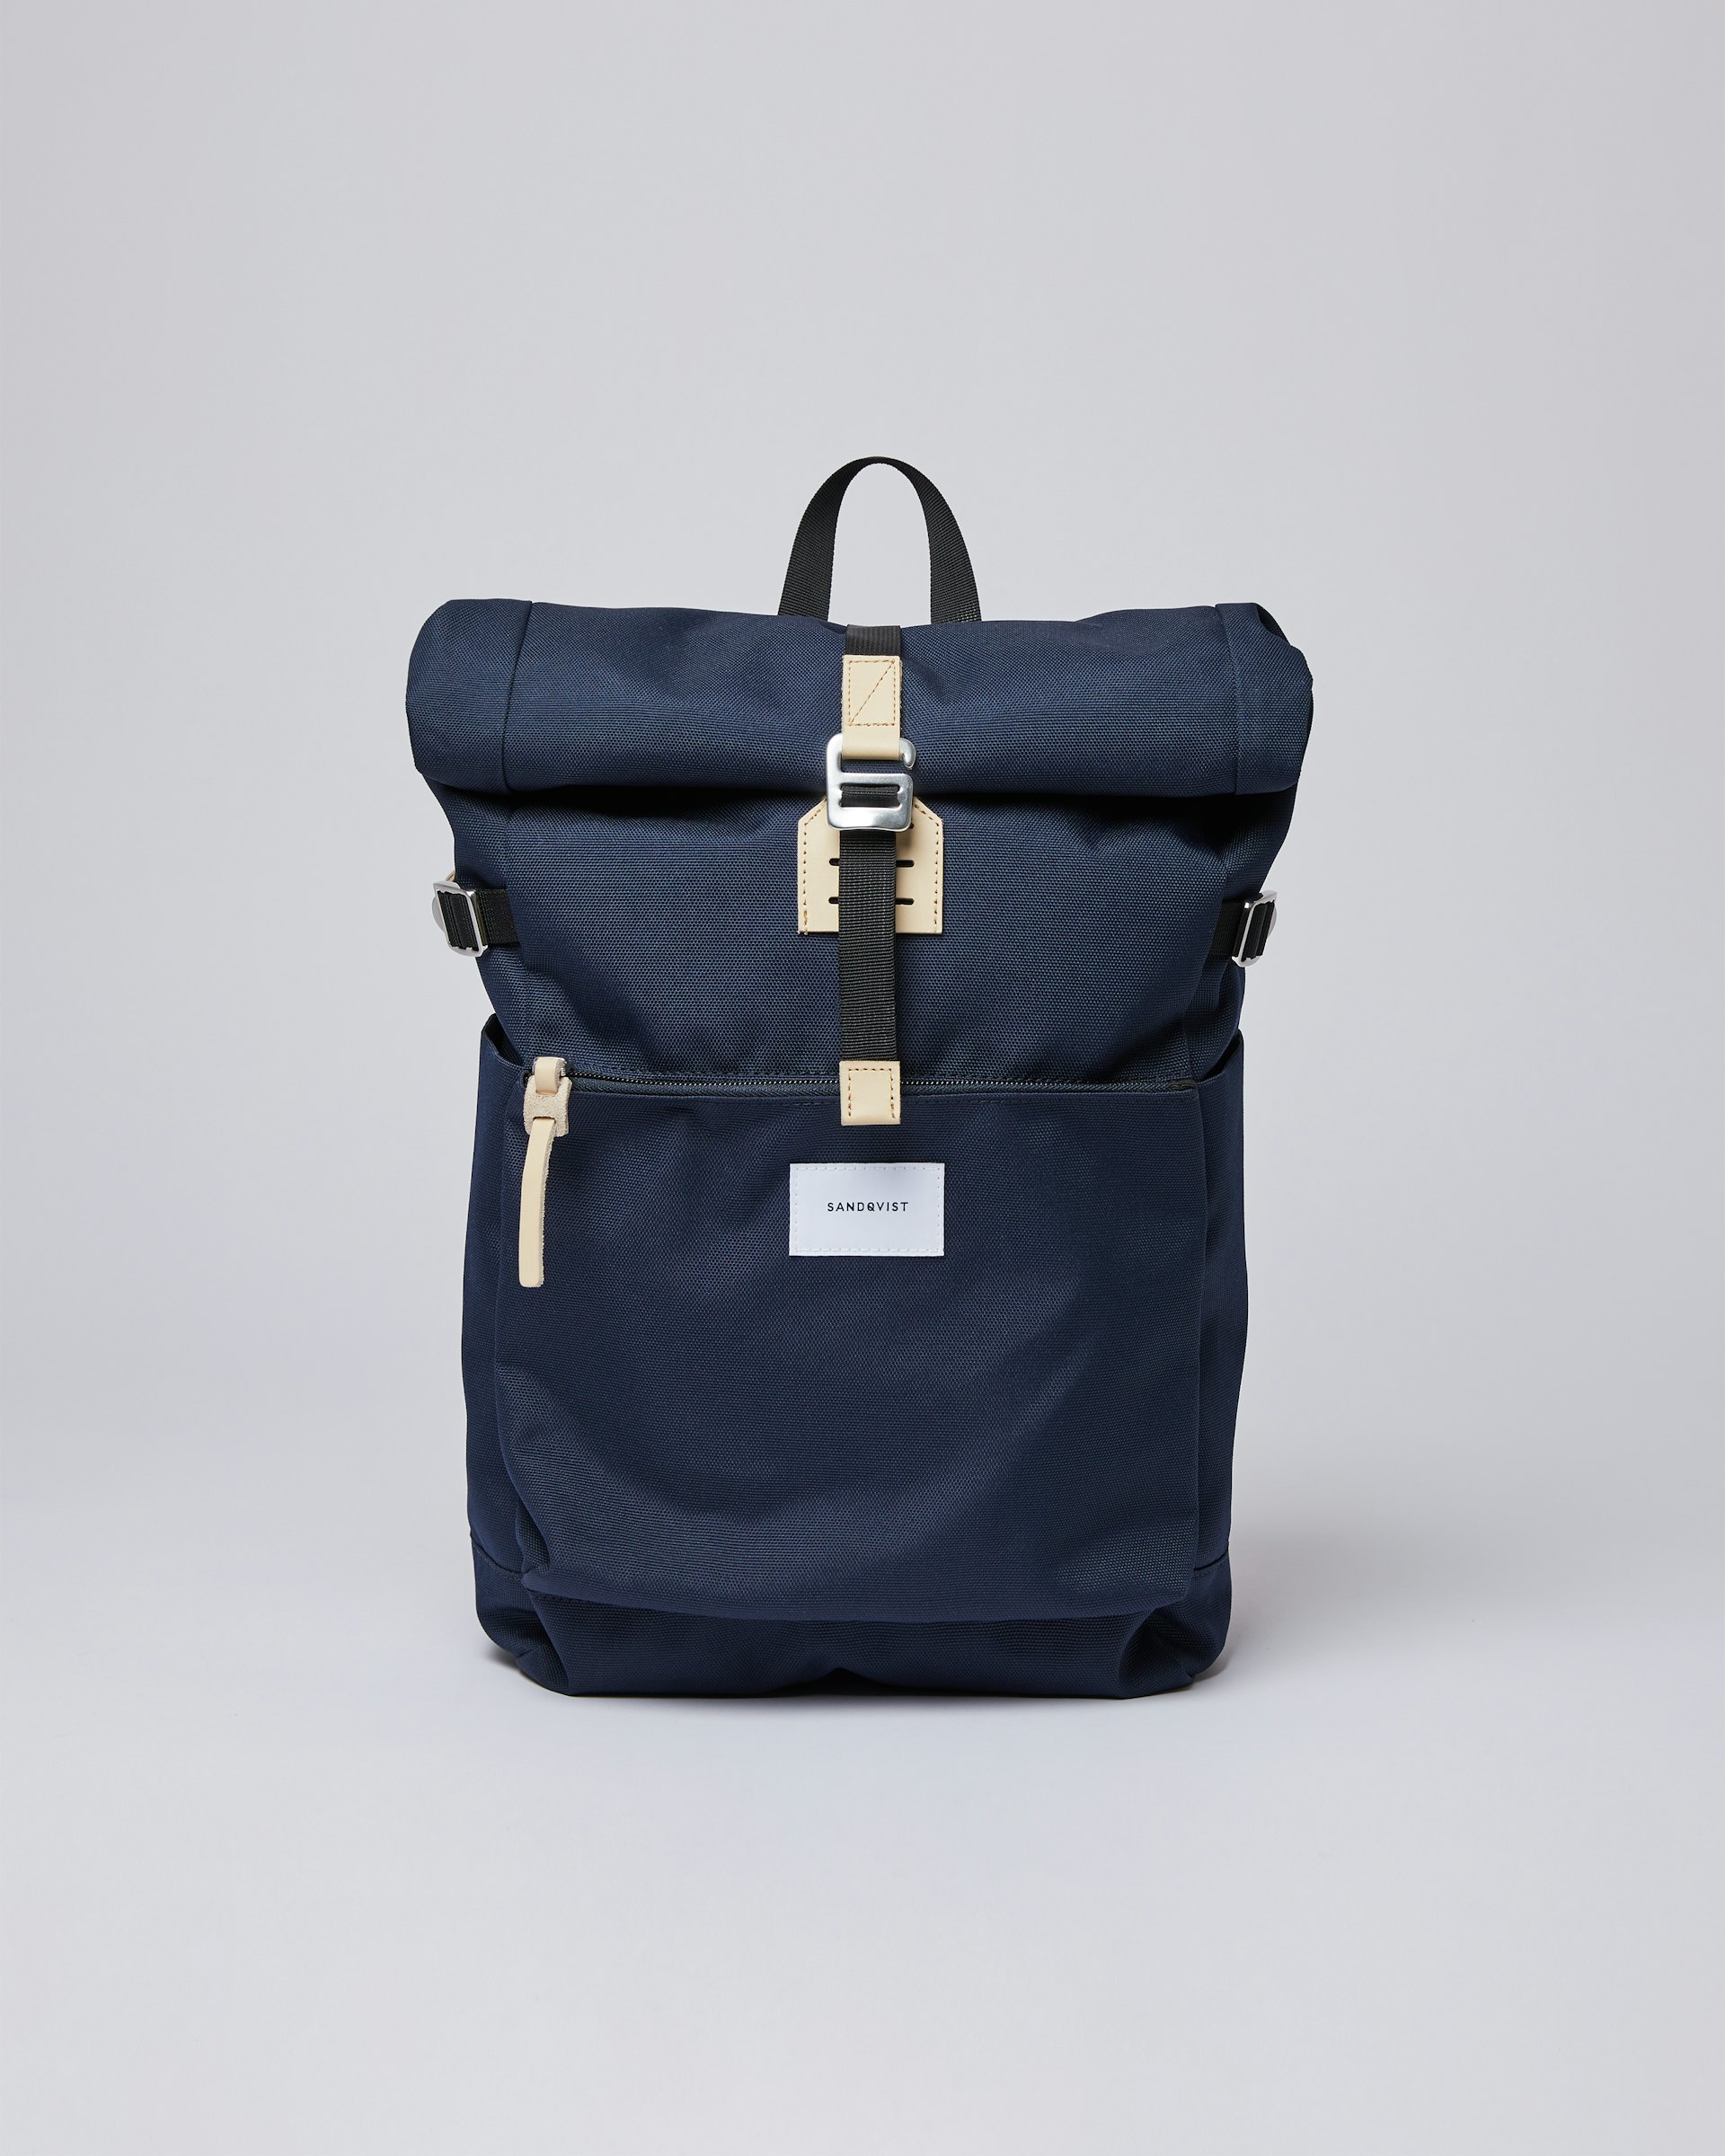 Ilon belongs to the category Backpacks and is in color navy (1 of 7)